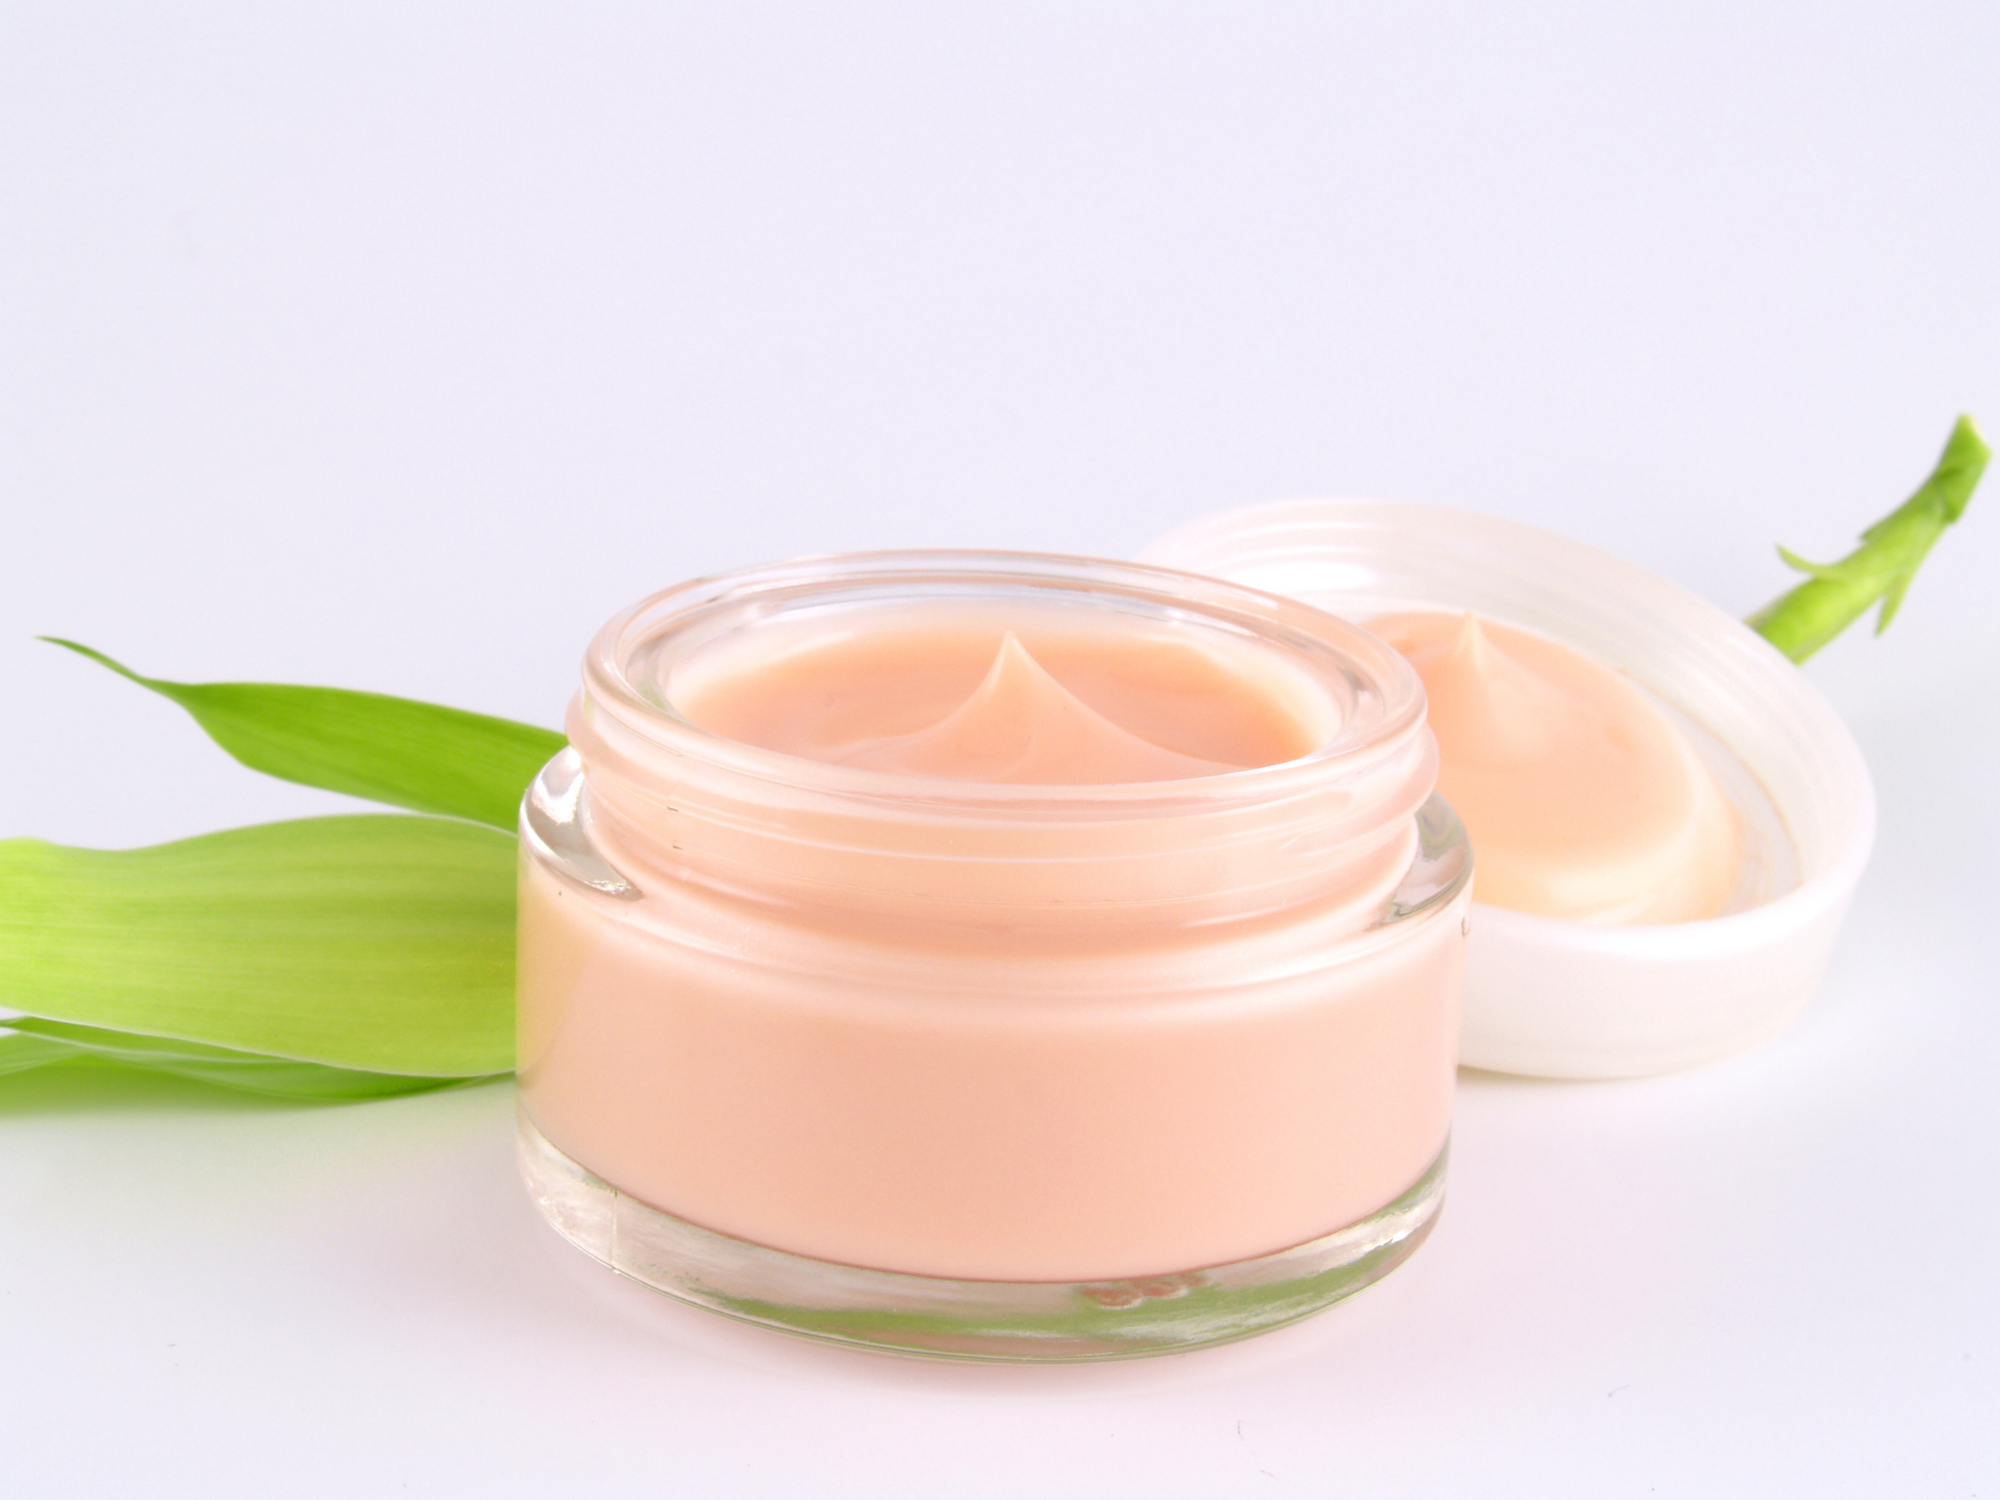 anti-aging cream | Cosmetic prouducts | Pinterest